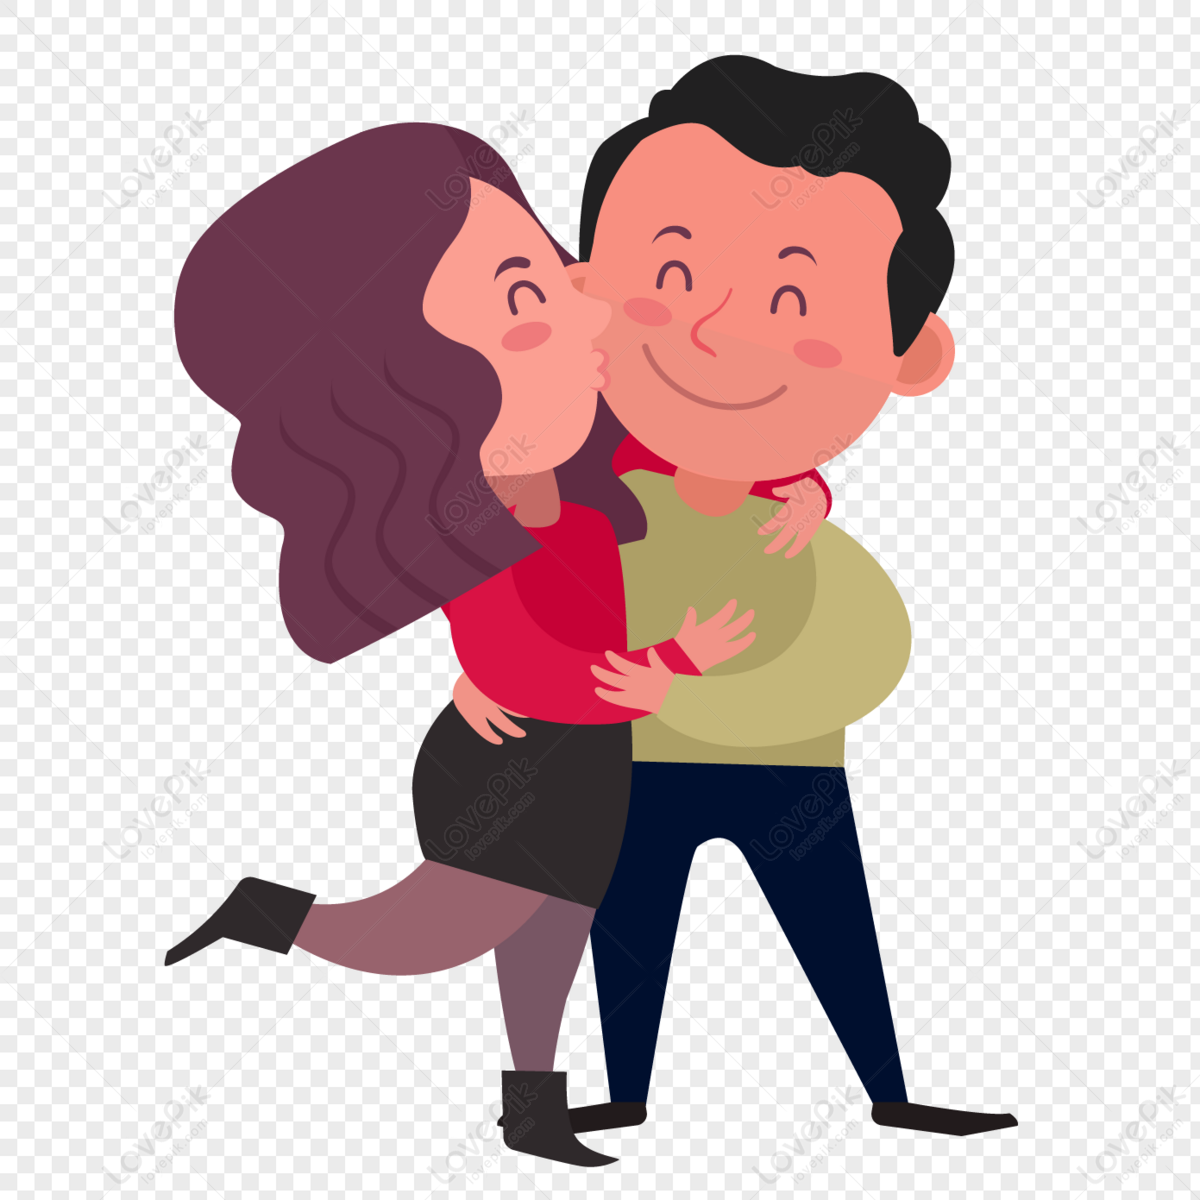 Lovers Kissing Their Cheeks On Valentines Day PNG Image Free Download And  Clipart Image For Free Download - Lovepik | 400969081